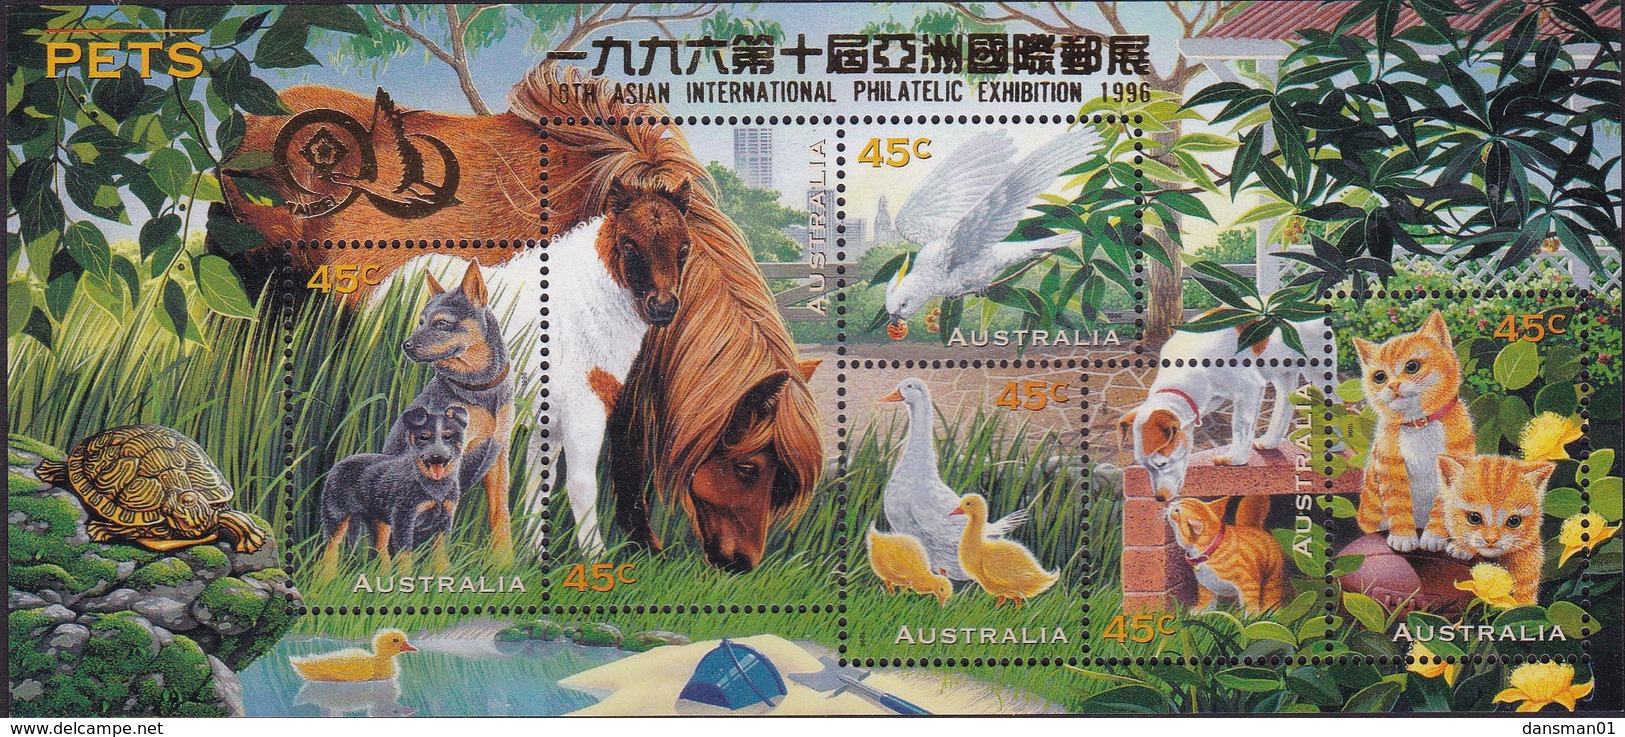 Australia 1996 Pets Sc 1563b Mint Never Hinged Ovpt 10th ASIAN - Mint Stamps